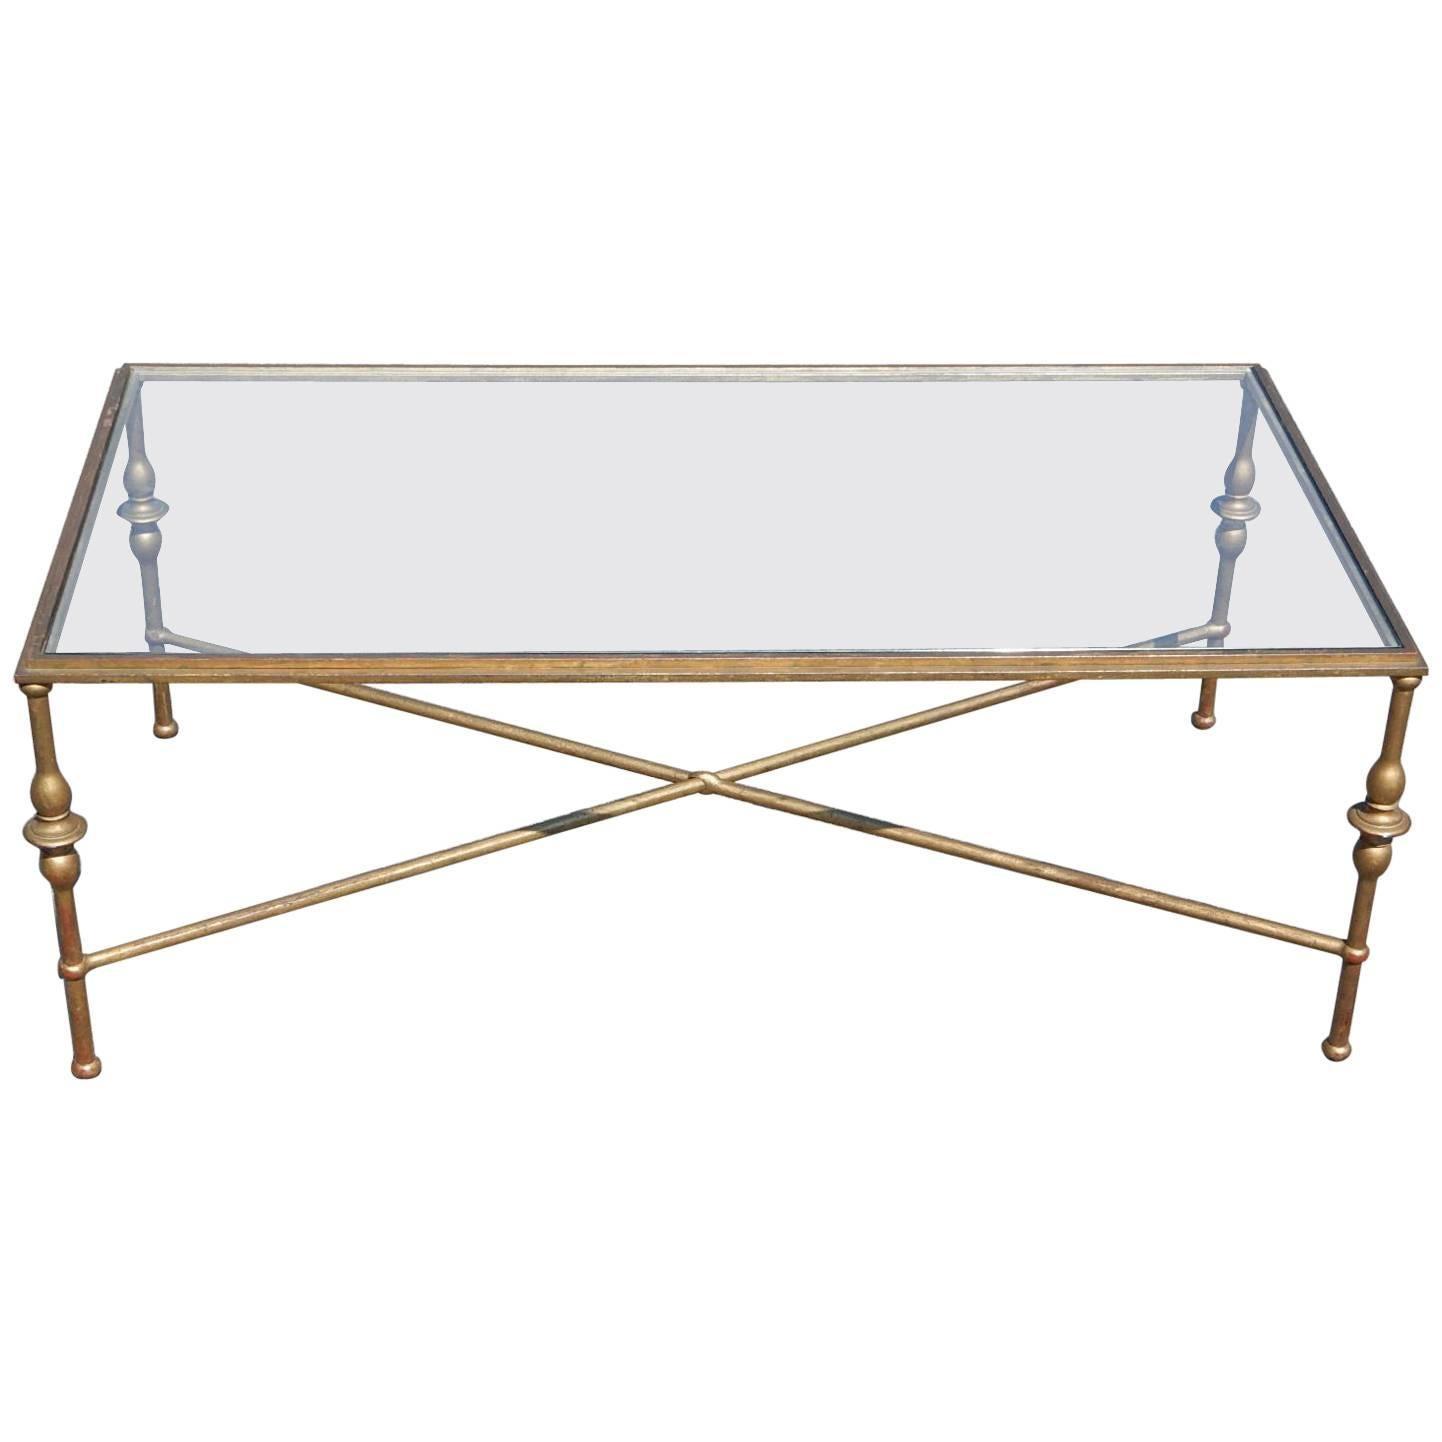 Ramsay Neoclassical Coffee Table, 1960 For Sale